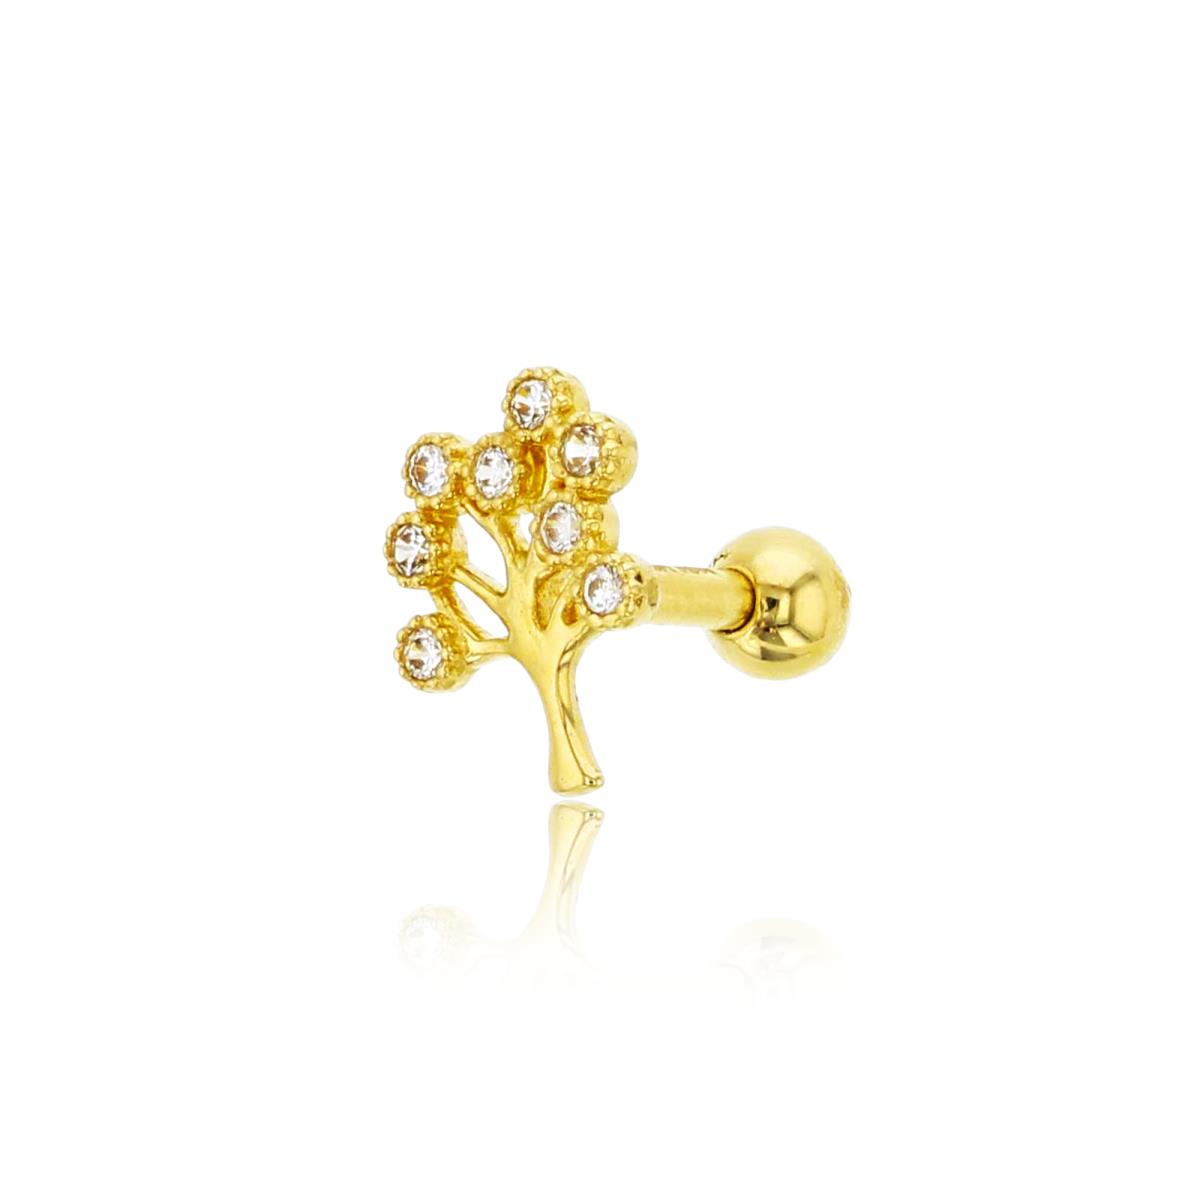 14K Yellow Gold Milgrain Tree Of Life Nose Stud with Ball Screw-Back